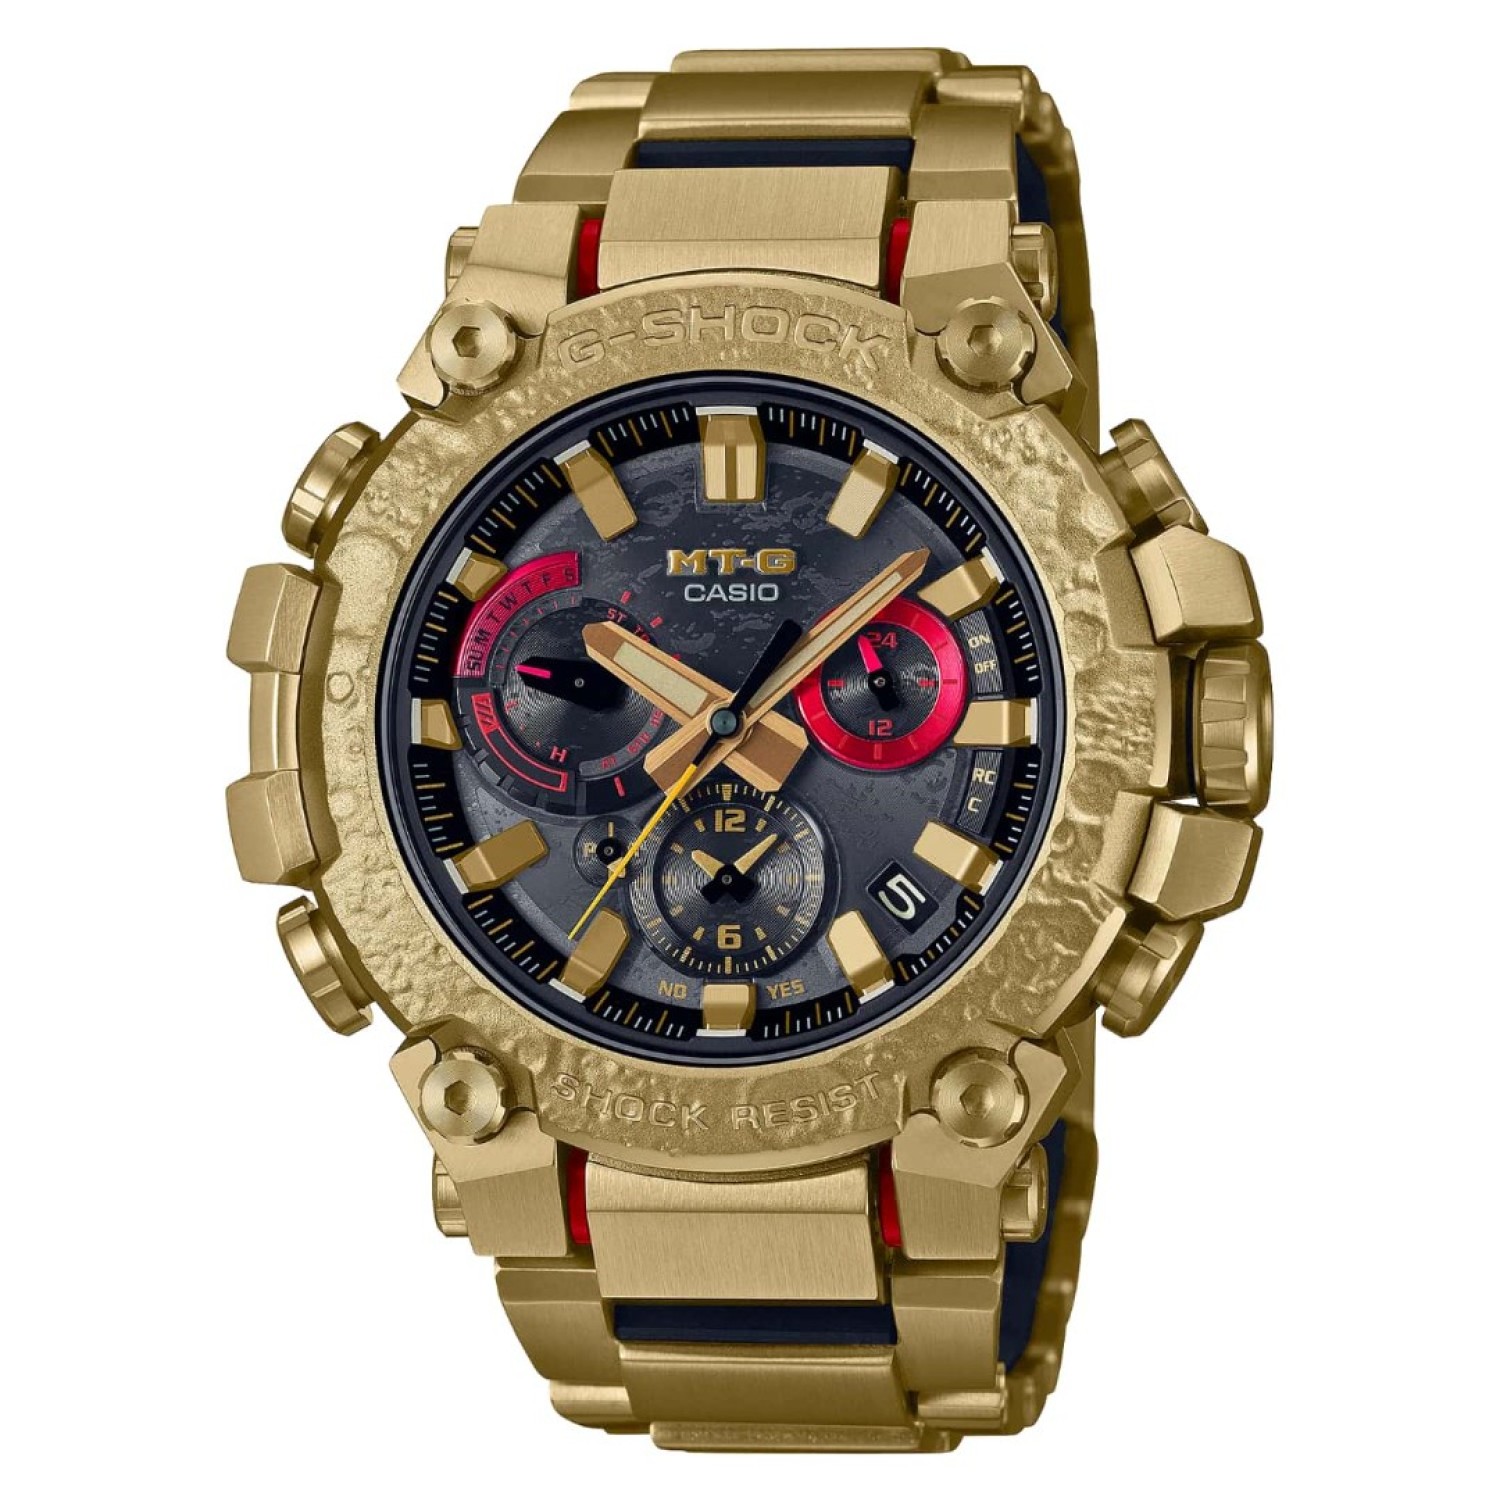 MTGB3000CX-9A G-Shock Chinese New Year MT-G. Celebrate New Year 2023, the Year of the Rabbit, with this very special MT-G timepiece combining original G-SHOCK resin with metal in an innovative form and design inspired by the “rabbit in the moon.